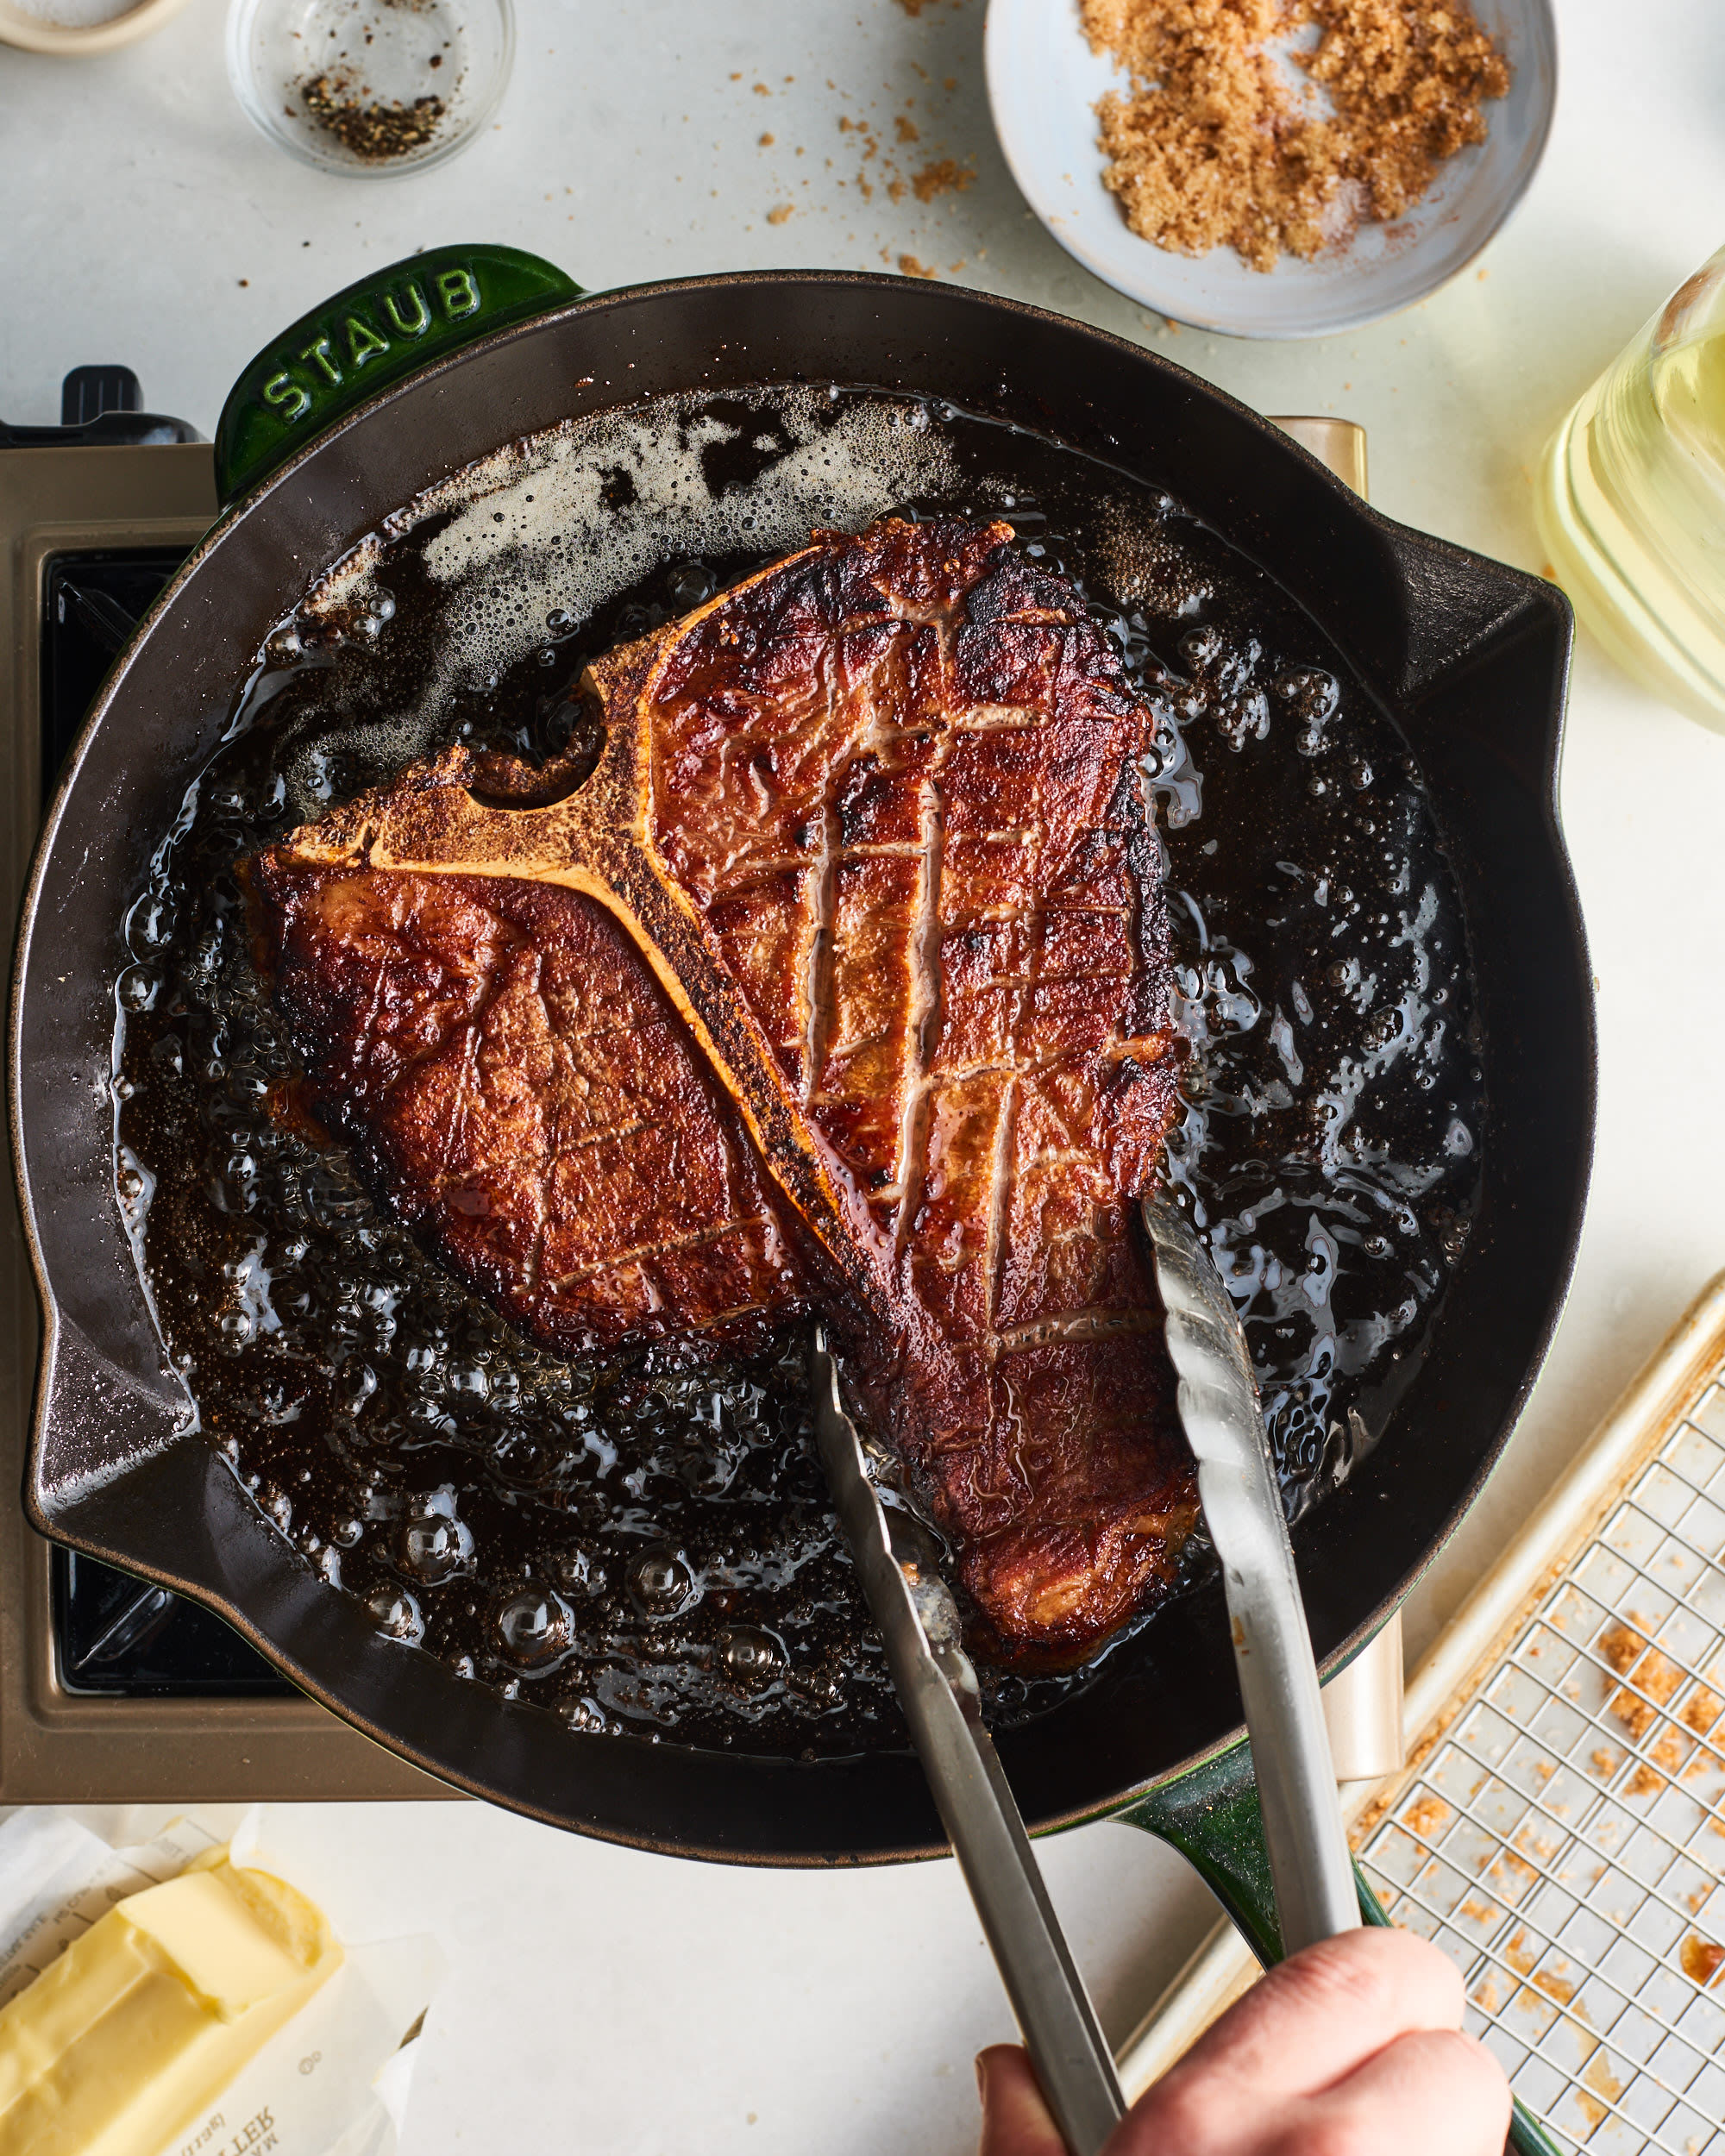 The Best Ways to Cook Steak, Explained